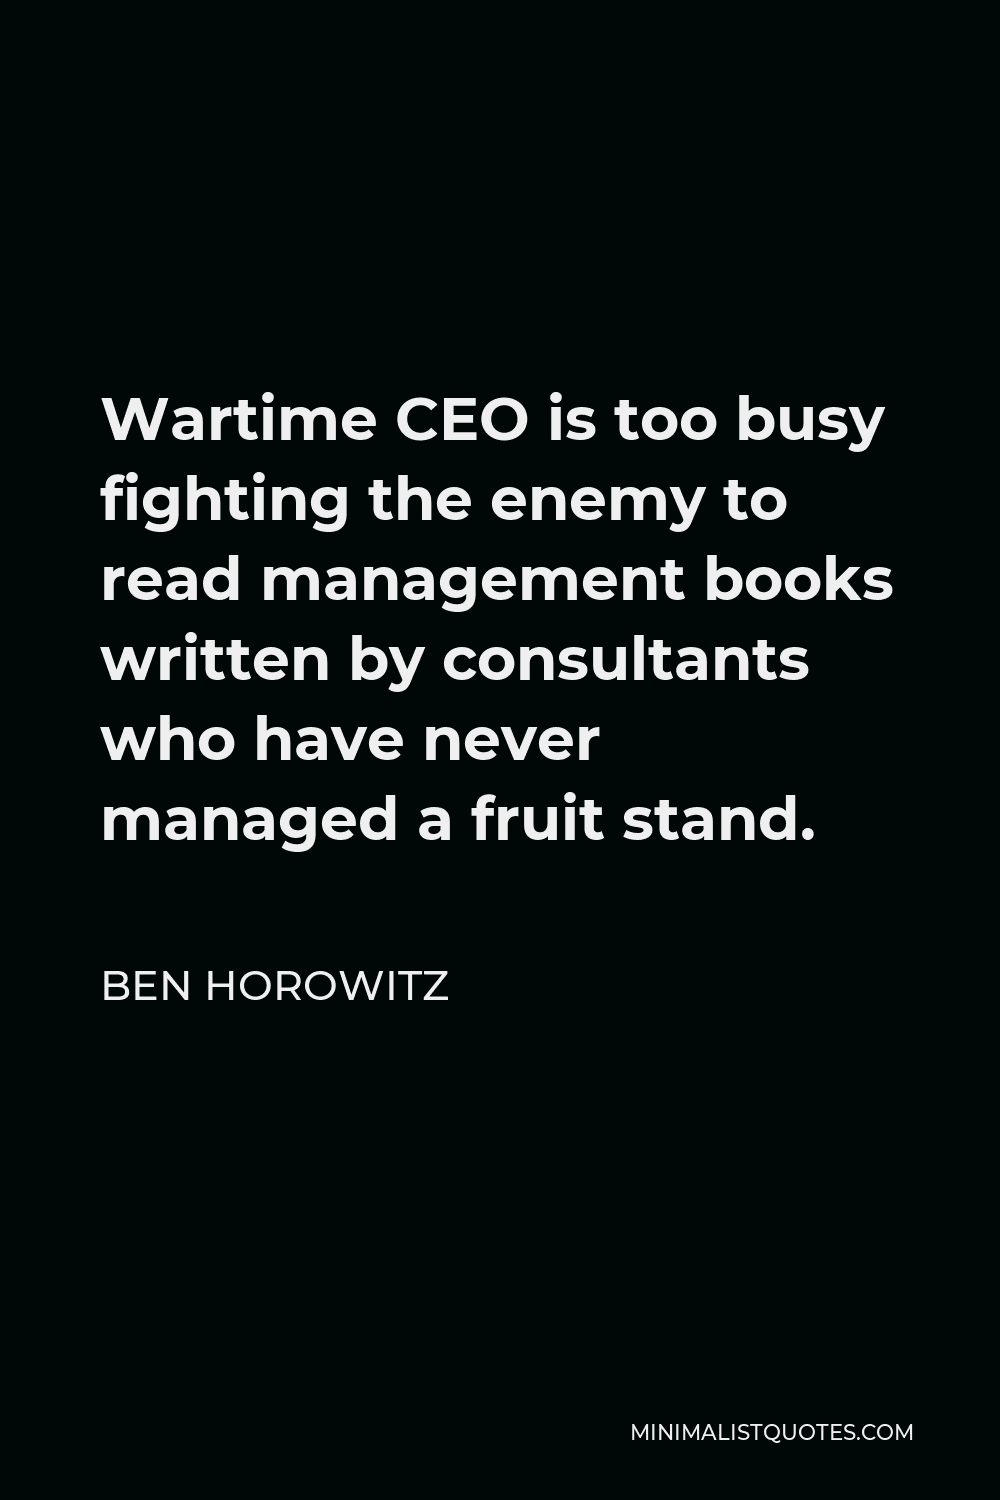 Ben Horowitz Quote - Wartime CEO is too busy fighting the enemy to read management books written by consultants who have never managed a fruit stand.